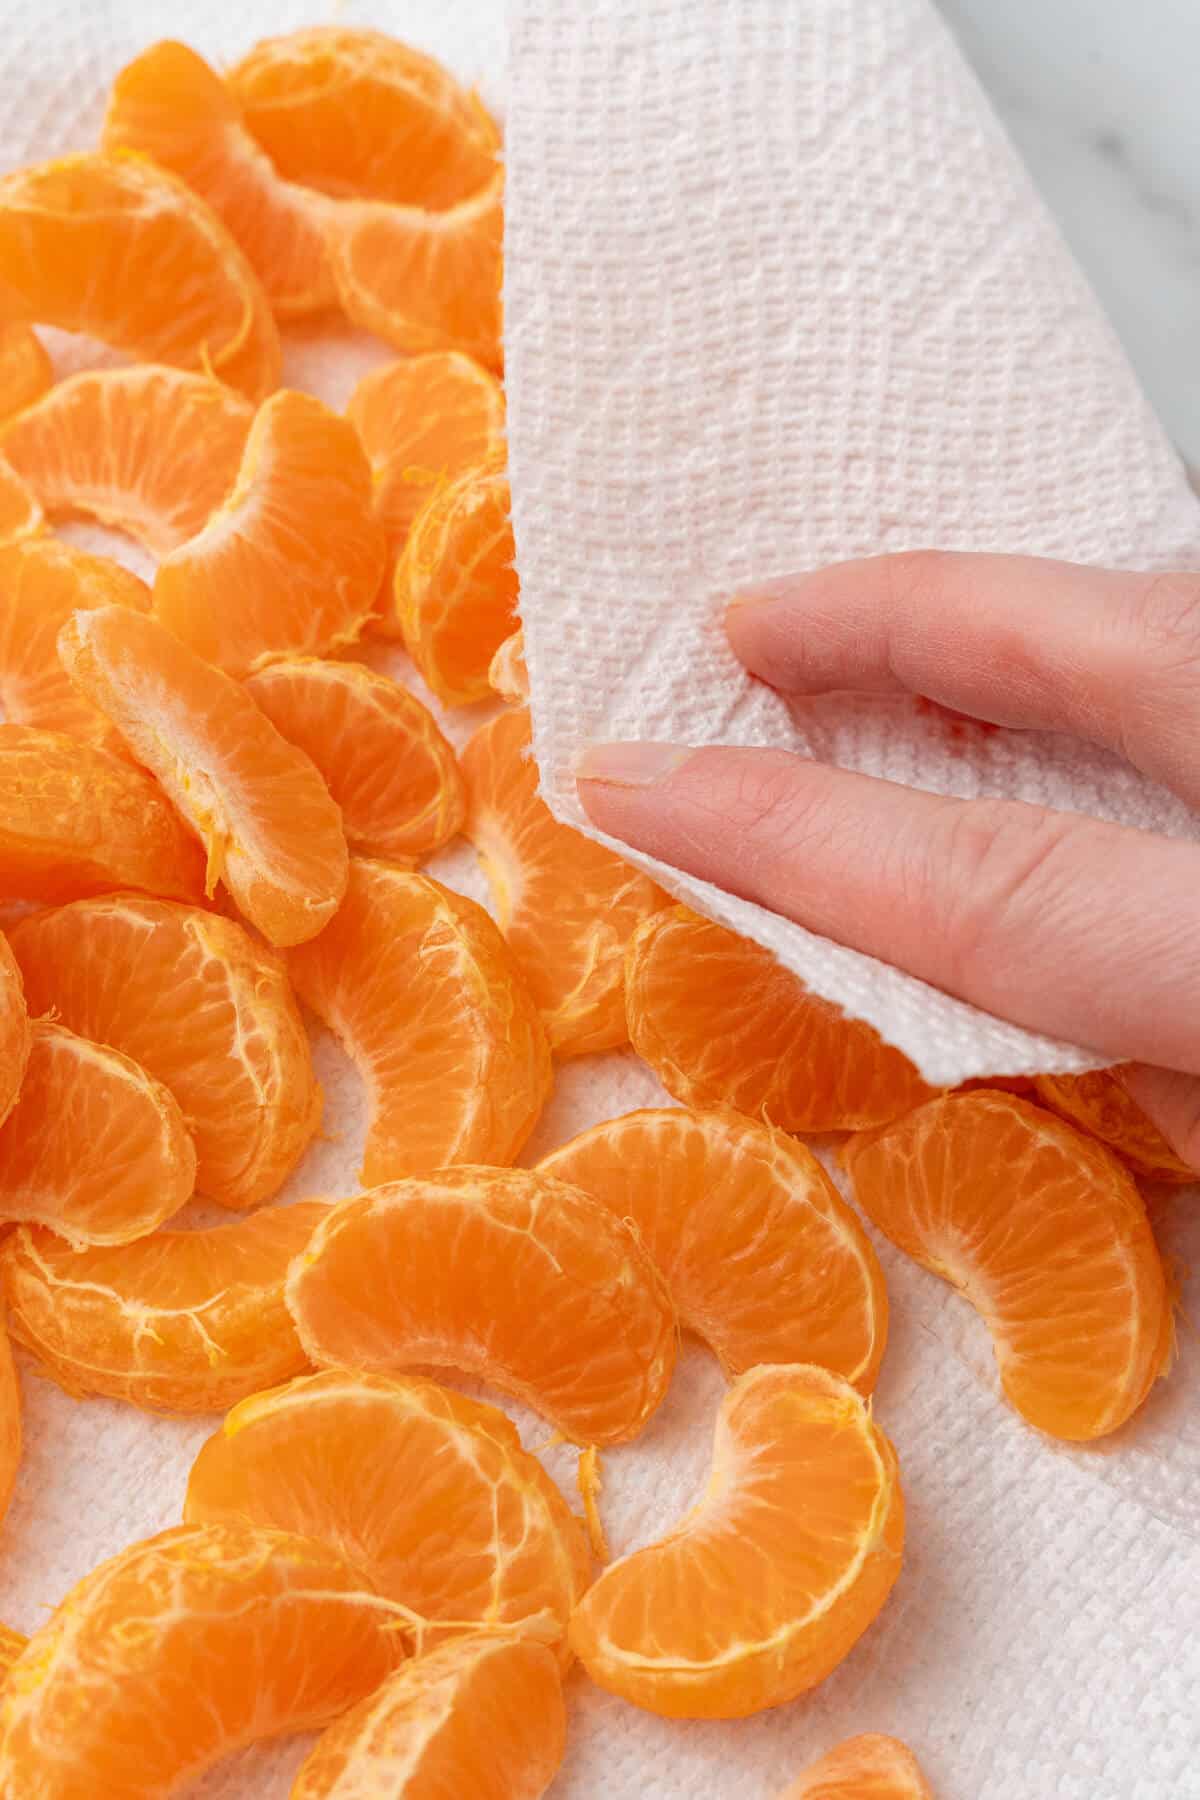 Orange segments being dried with a paper towel. 